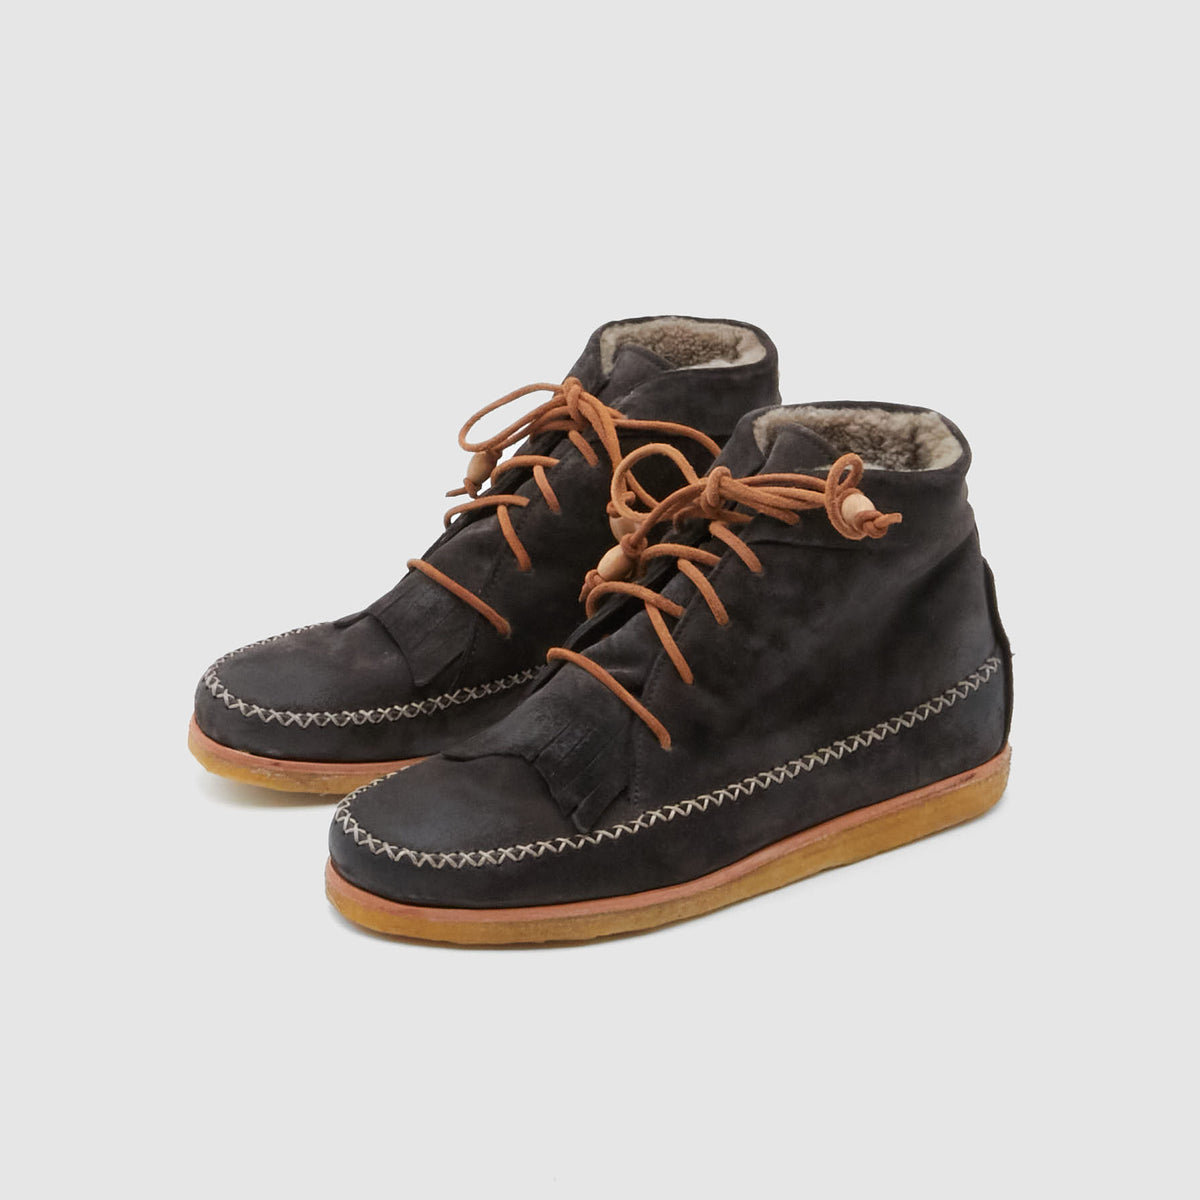 n.d.c. made by hand Softy Shearling Moccasin Boot